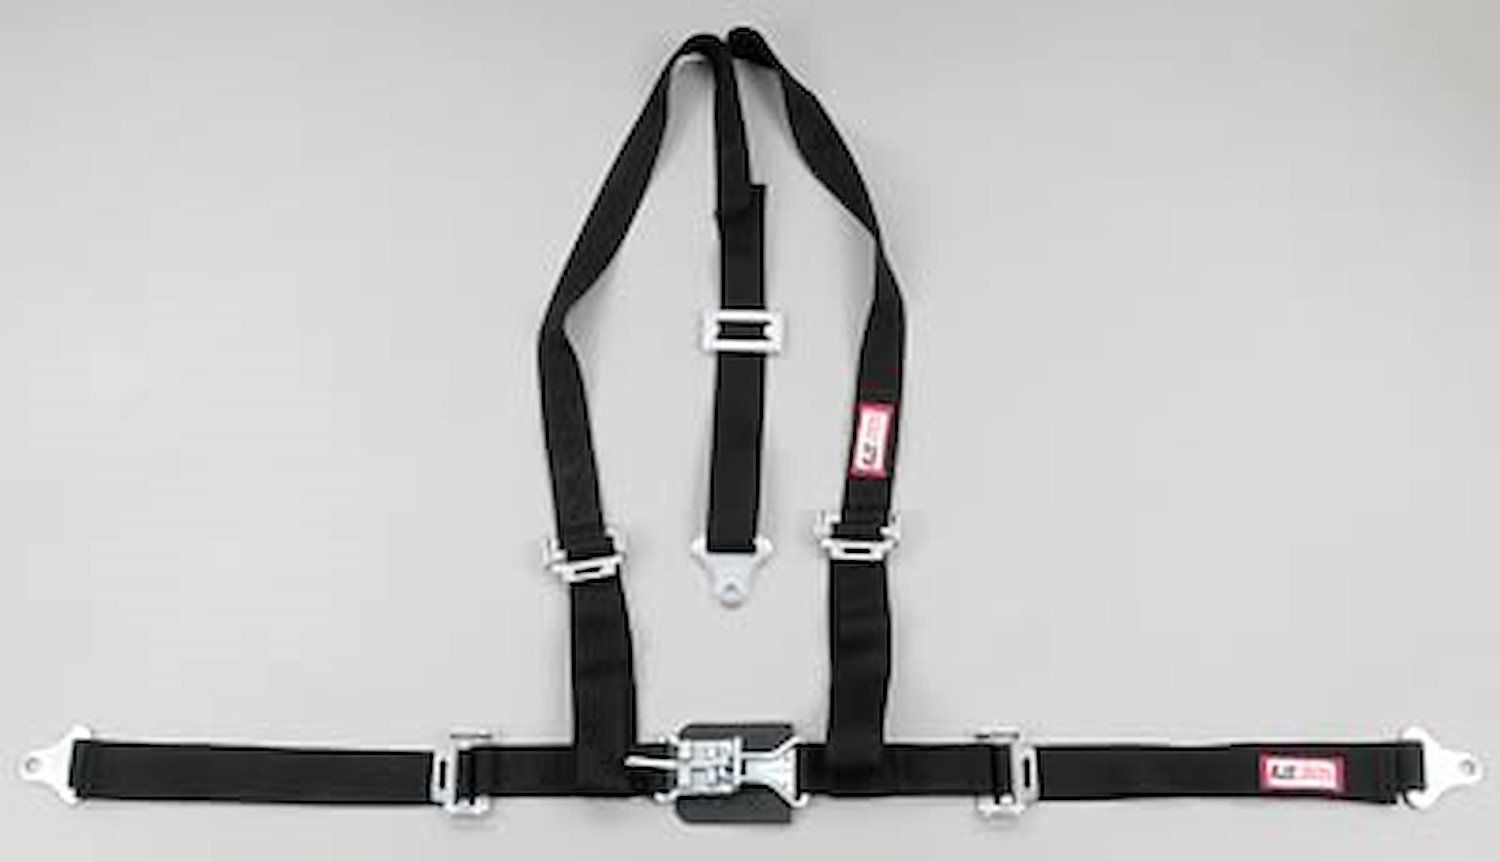 NON-SFI L&L HARNESS 3 PULL DOWN Lap Belt w/Adjuster SNAP 2 S.H. Y FLOOR Mount w/STERNUM STRAP WRAP/SNAP YELLOW